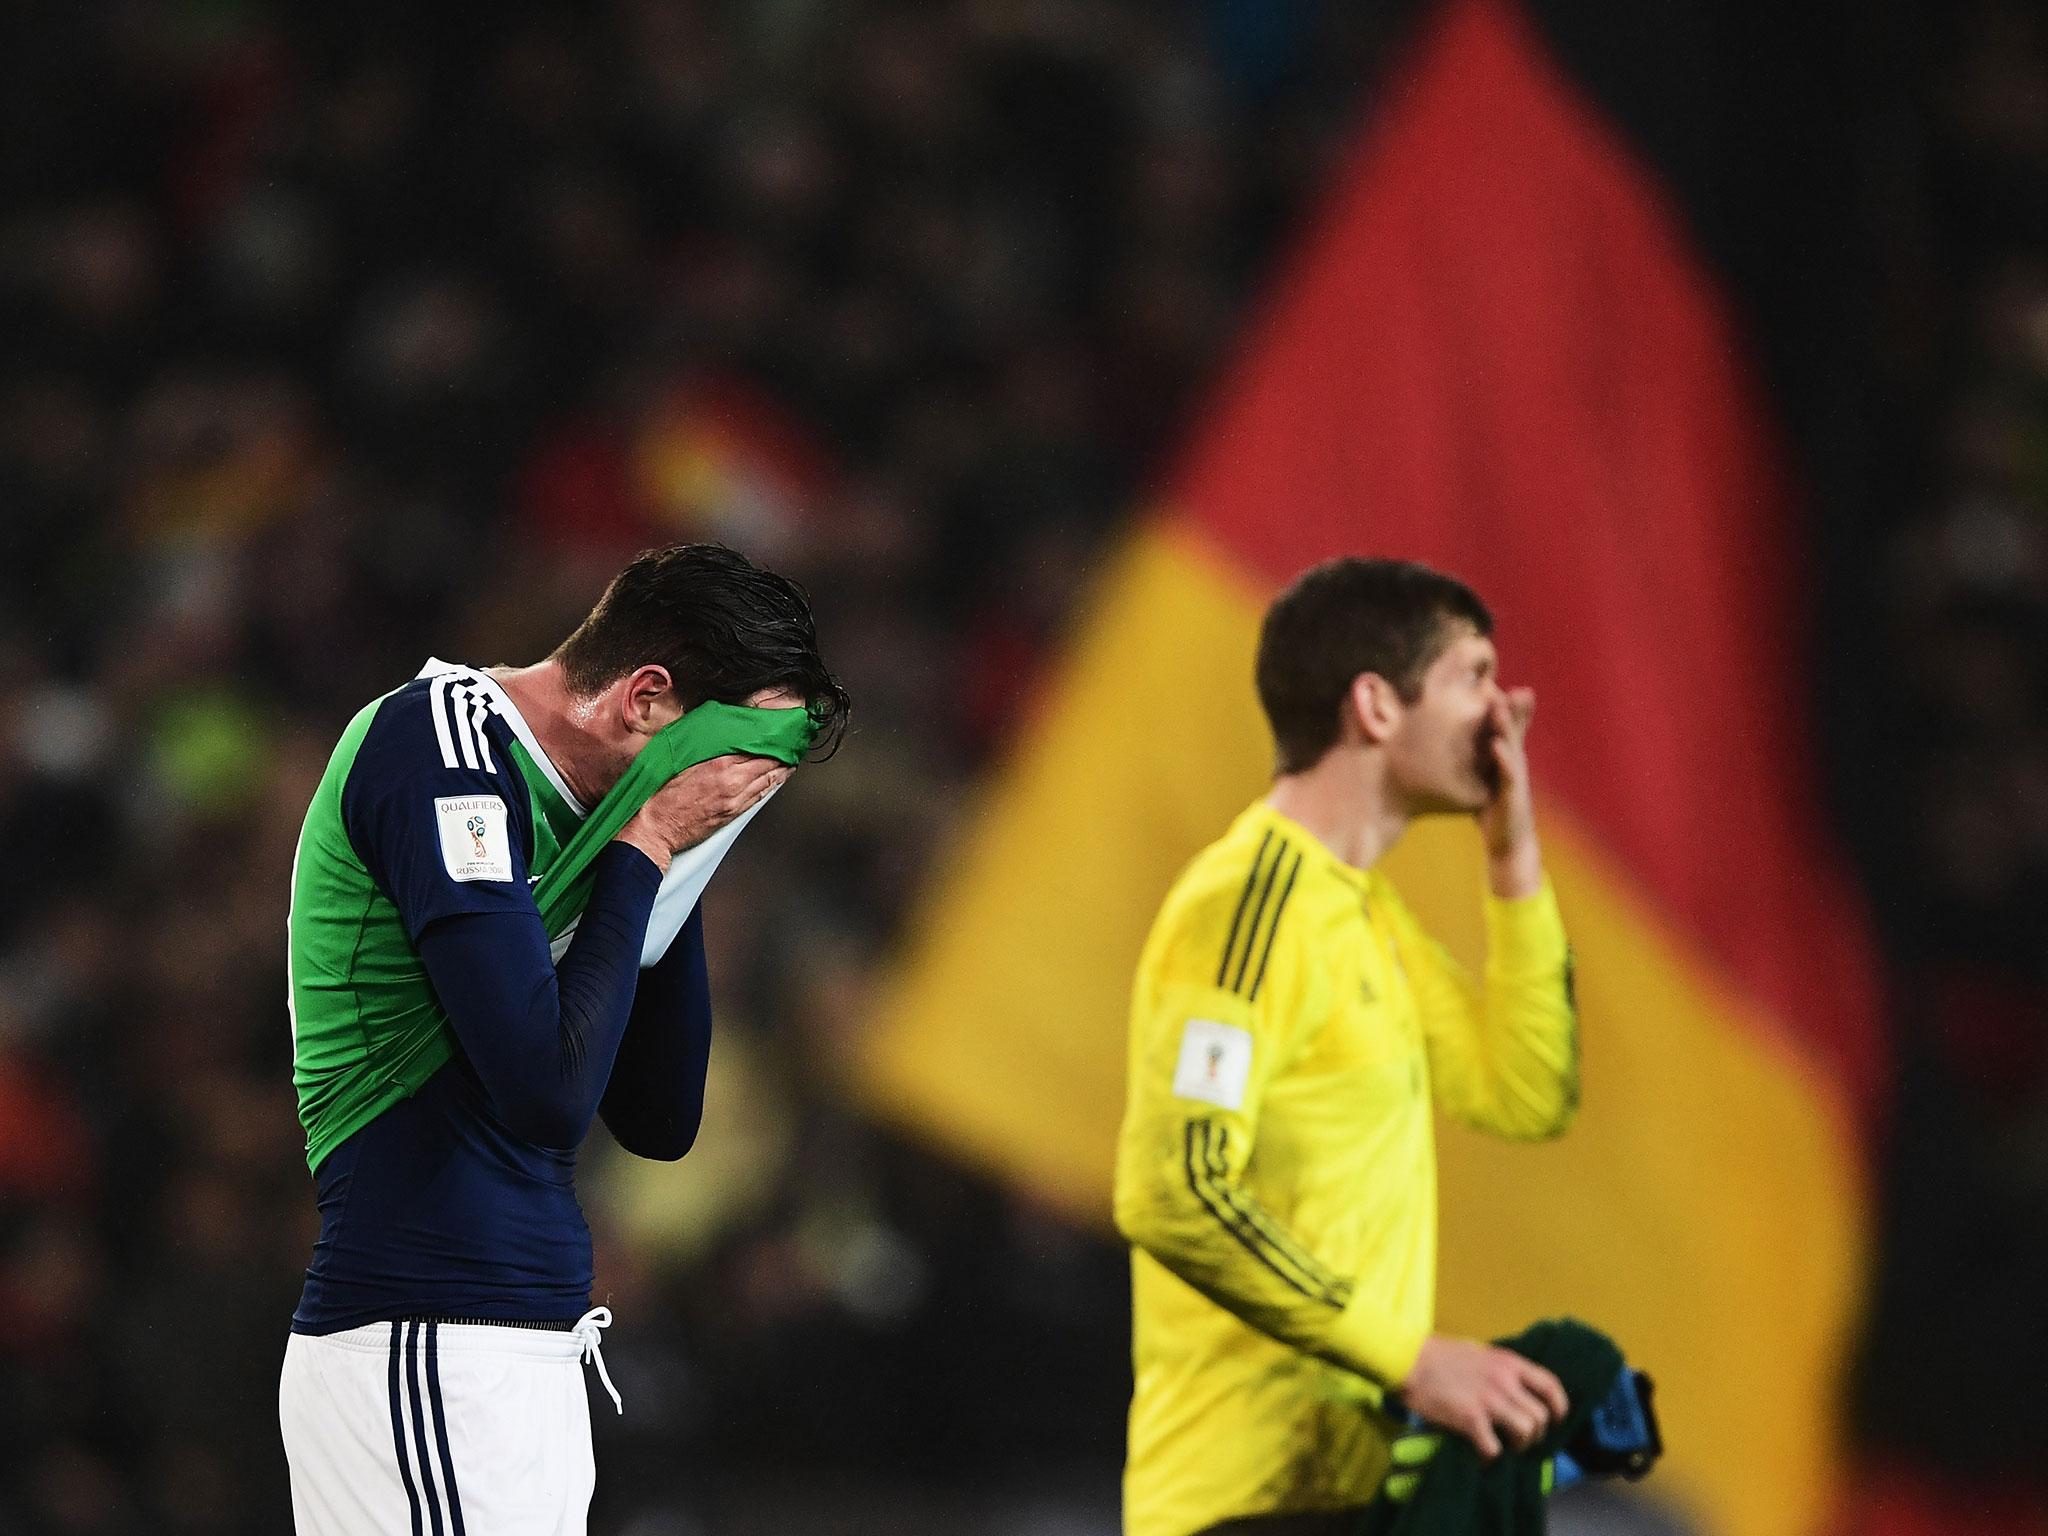 Northern Ireland lost 2-0 to Germany in their last World Cup qualification fixture